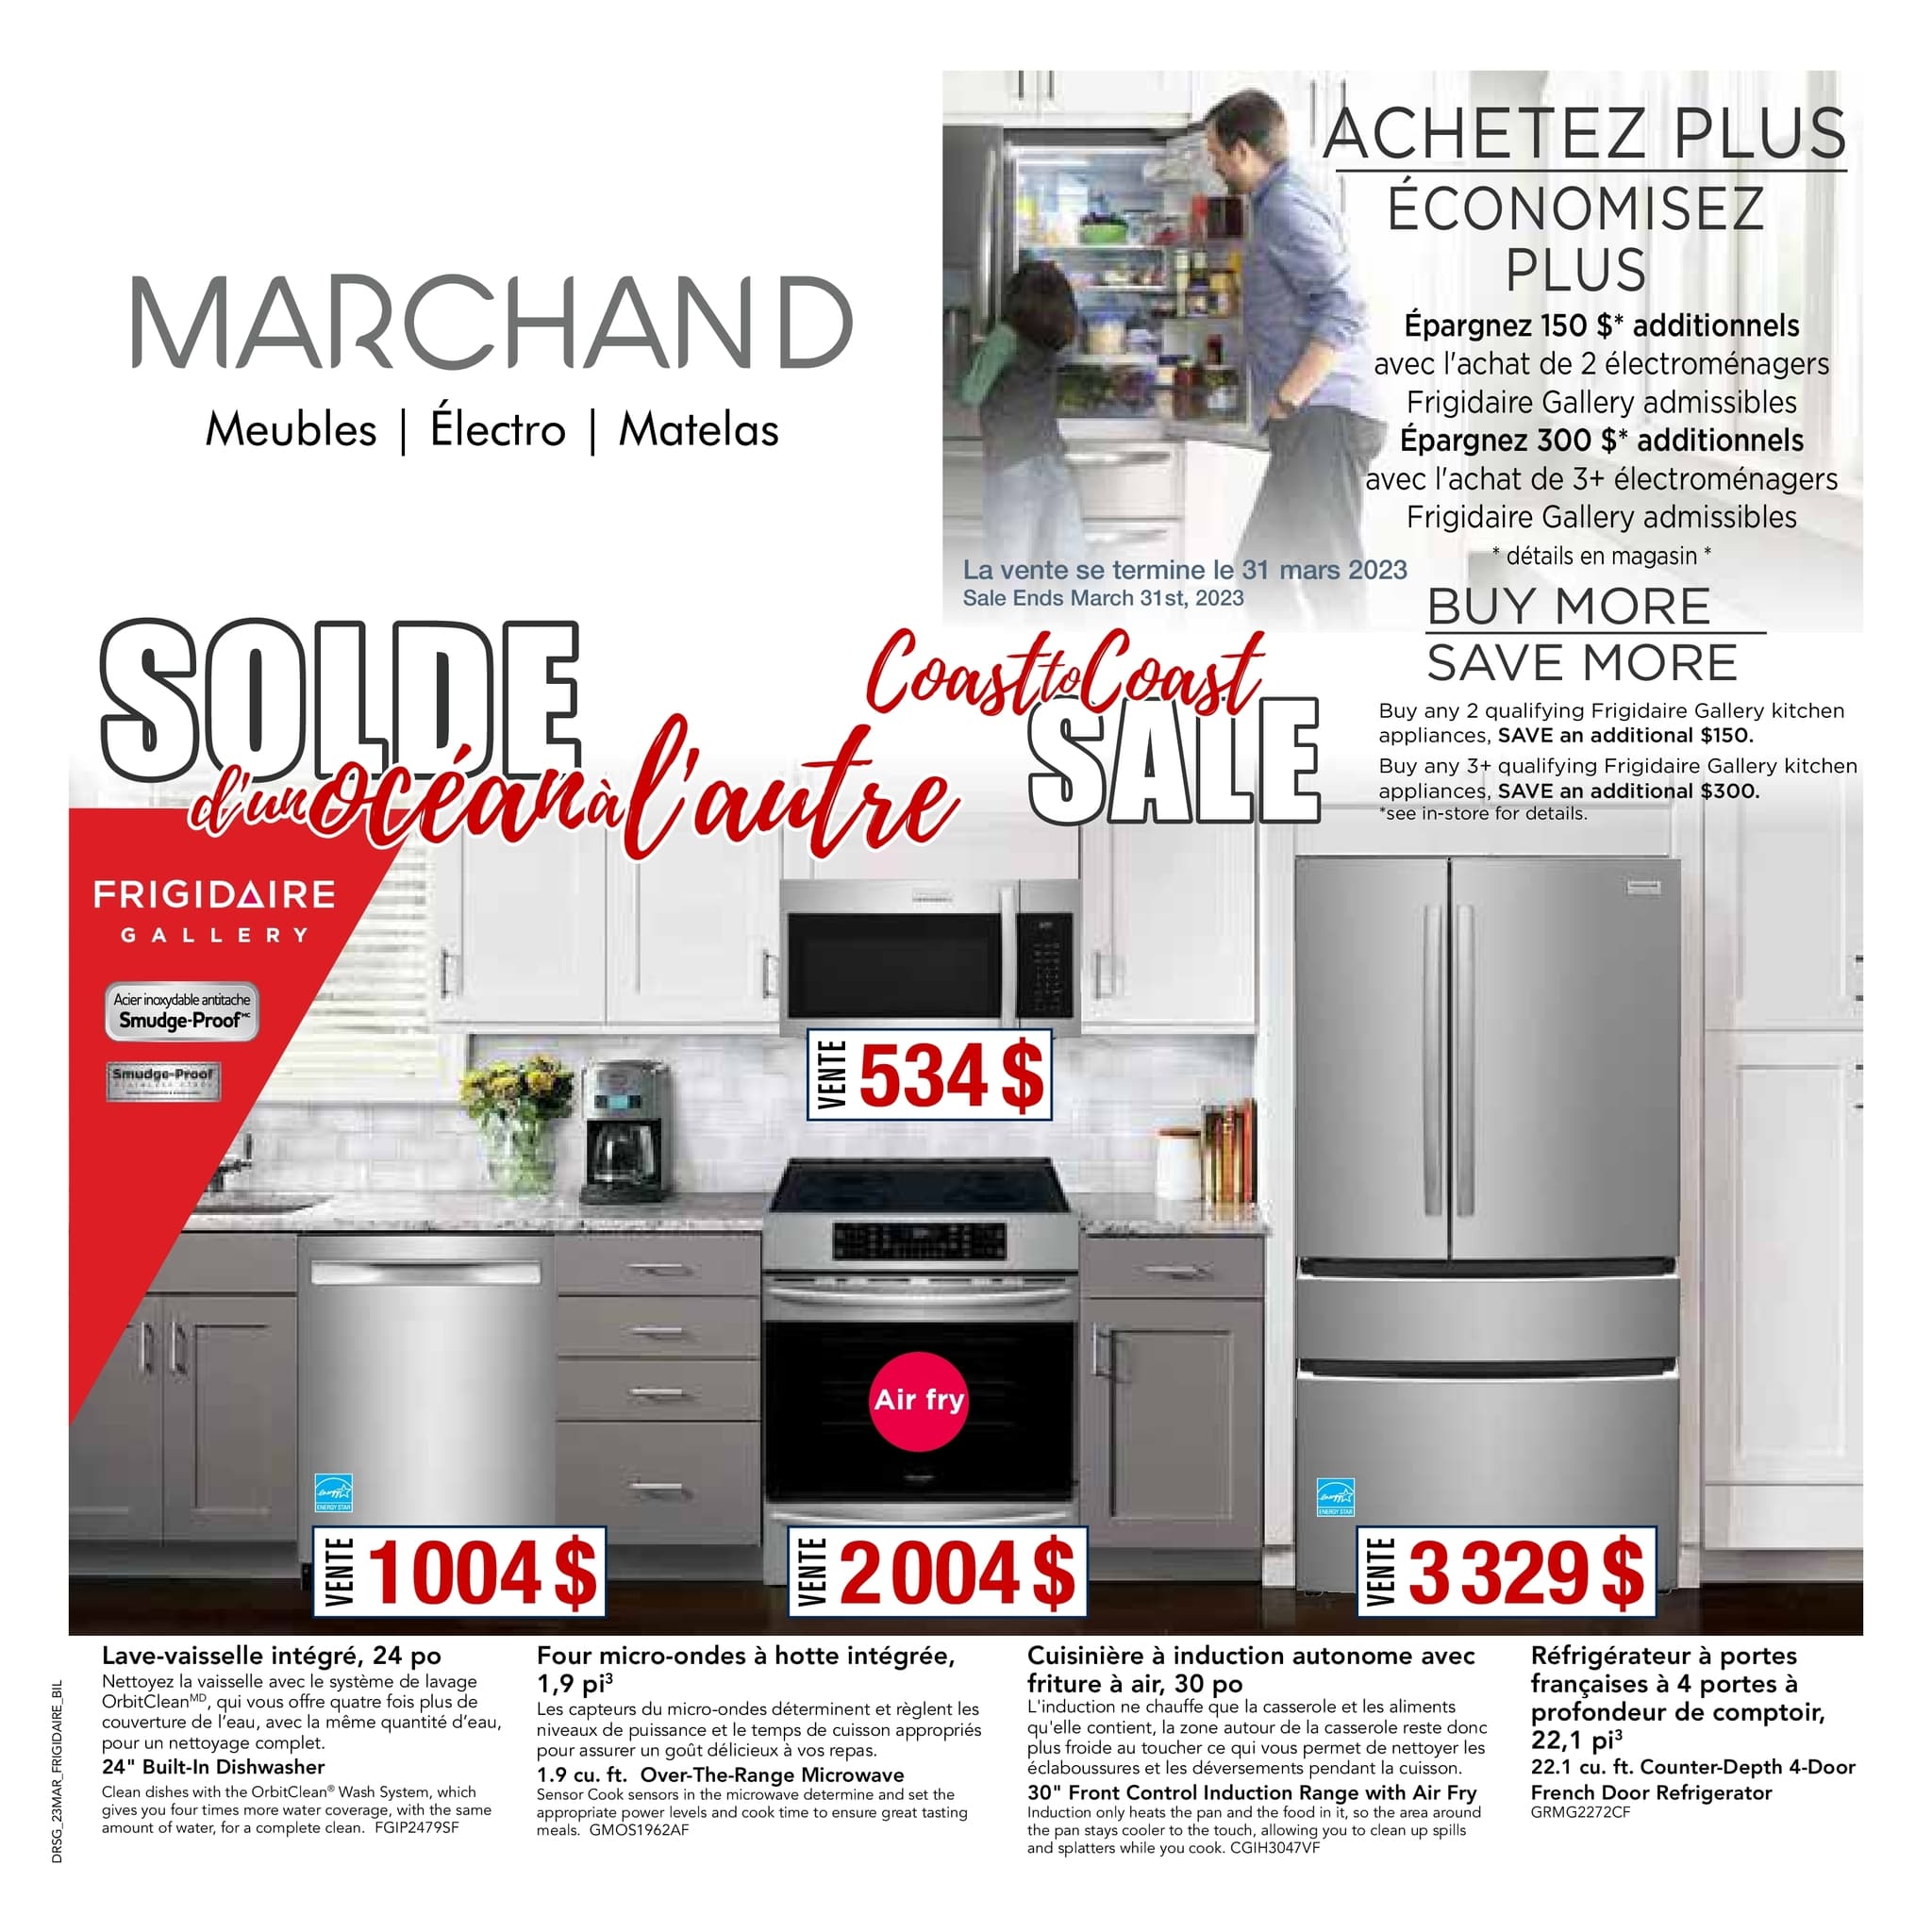 Circulaire Meubles Marchand - Frigidare Electrolux - Page 1